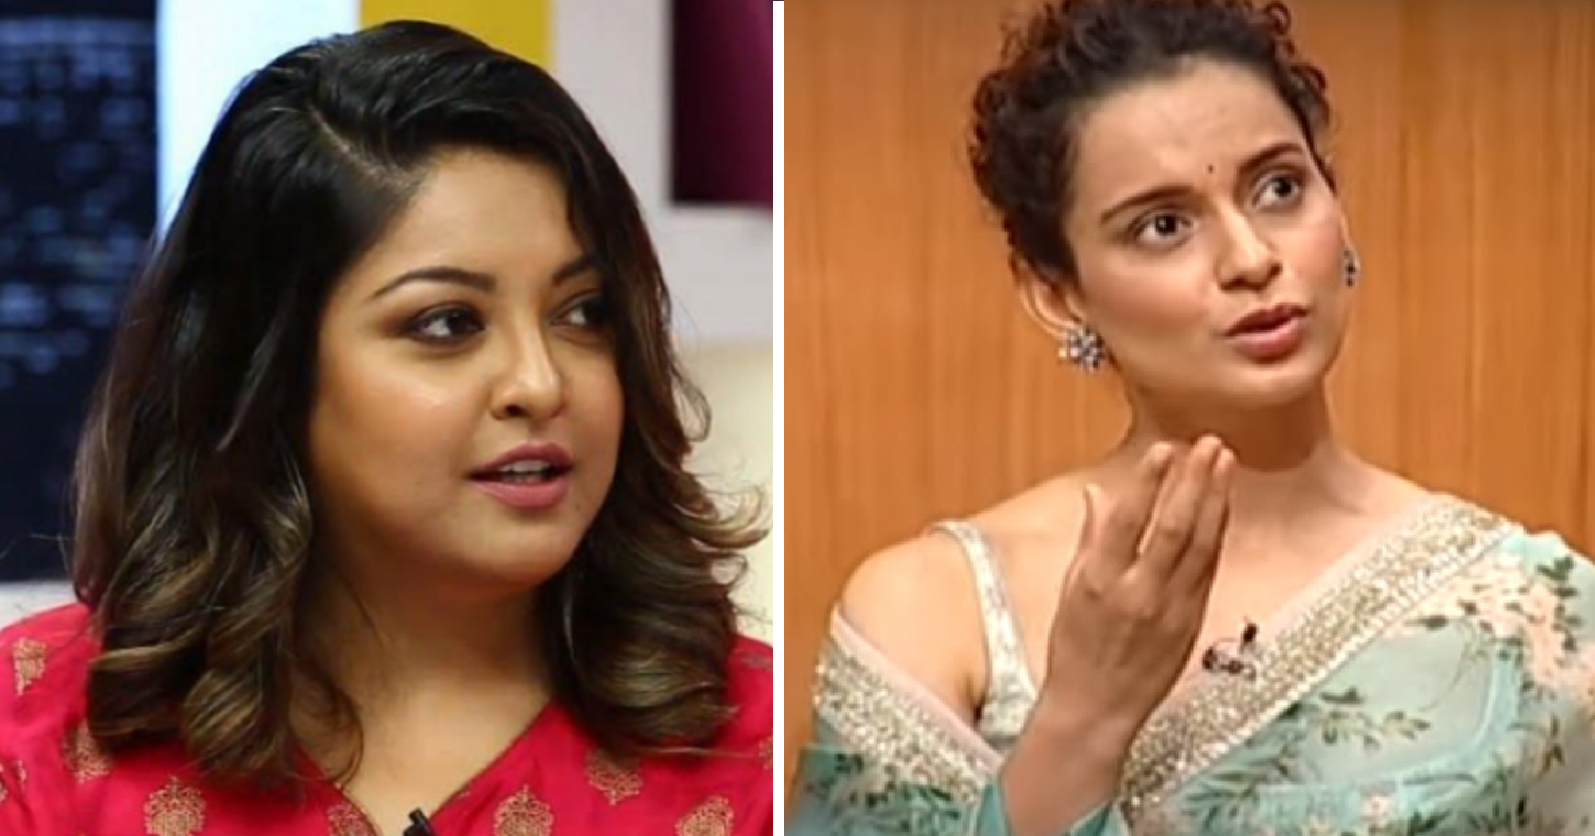 Kangana Ranaut Extends Support to Tanushree: “Raja Beta Needs To Be Told The Meaning of ‘No'”